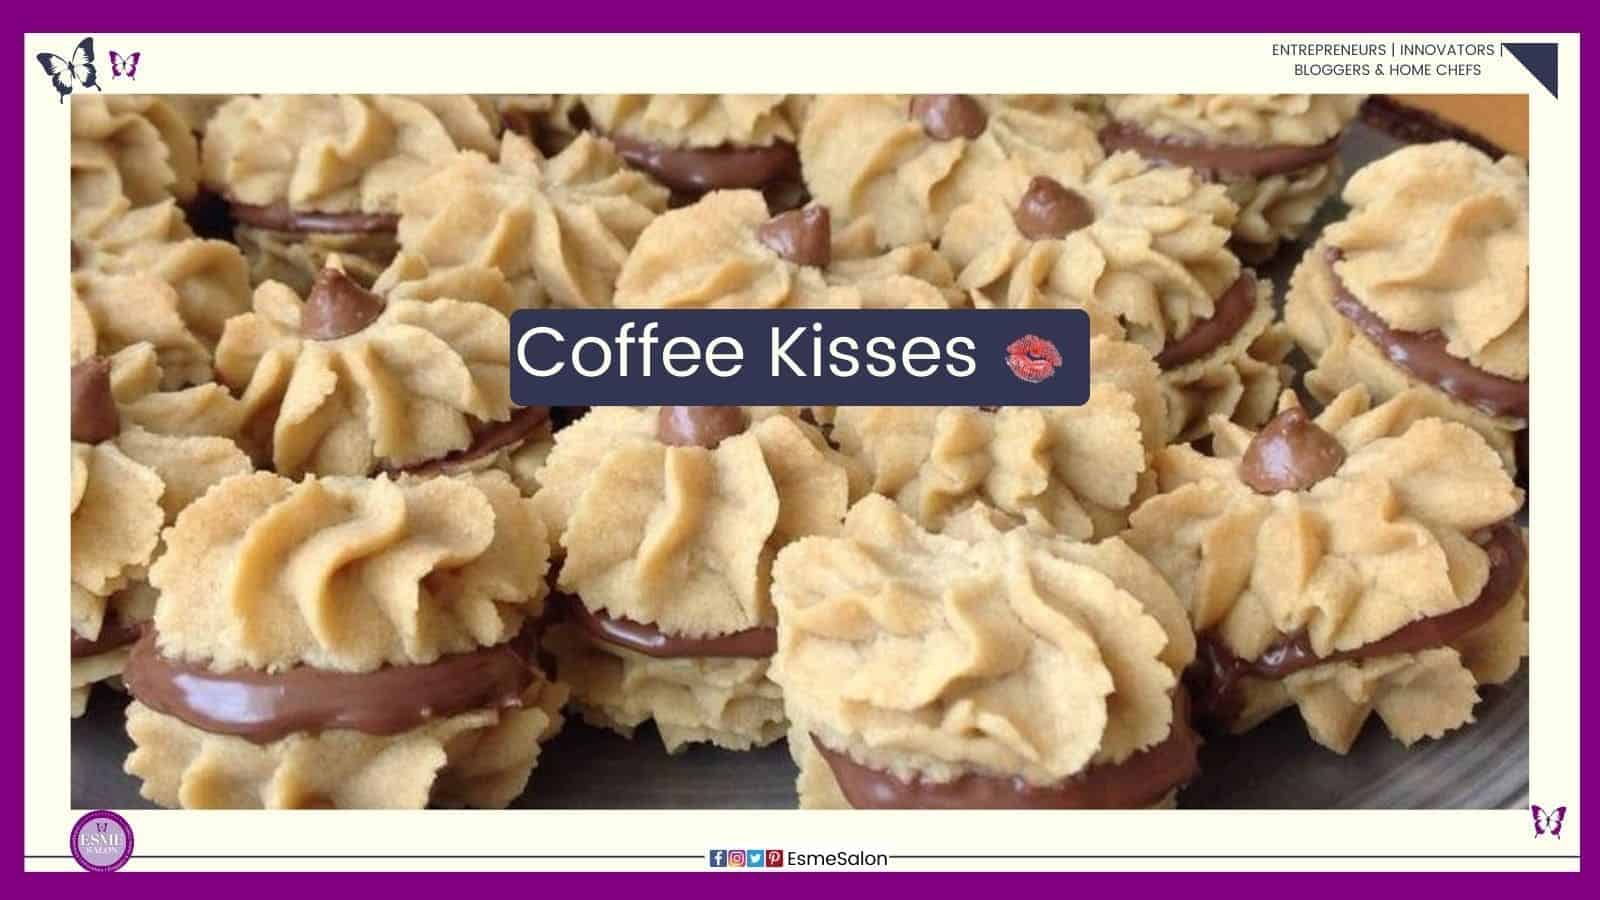 an image of a batch of Coffee Kisses cookies with chocolate filling and stacked together